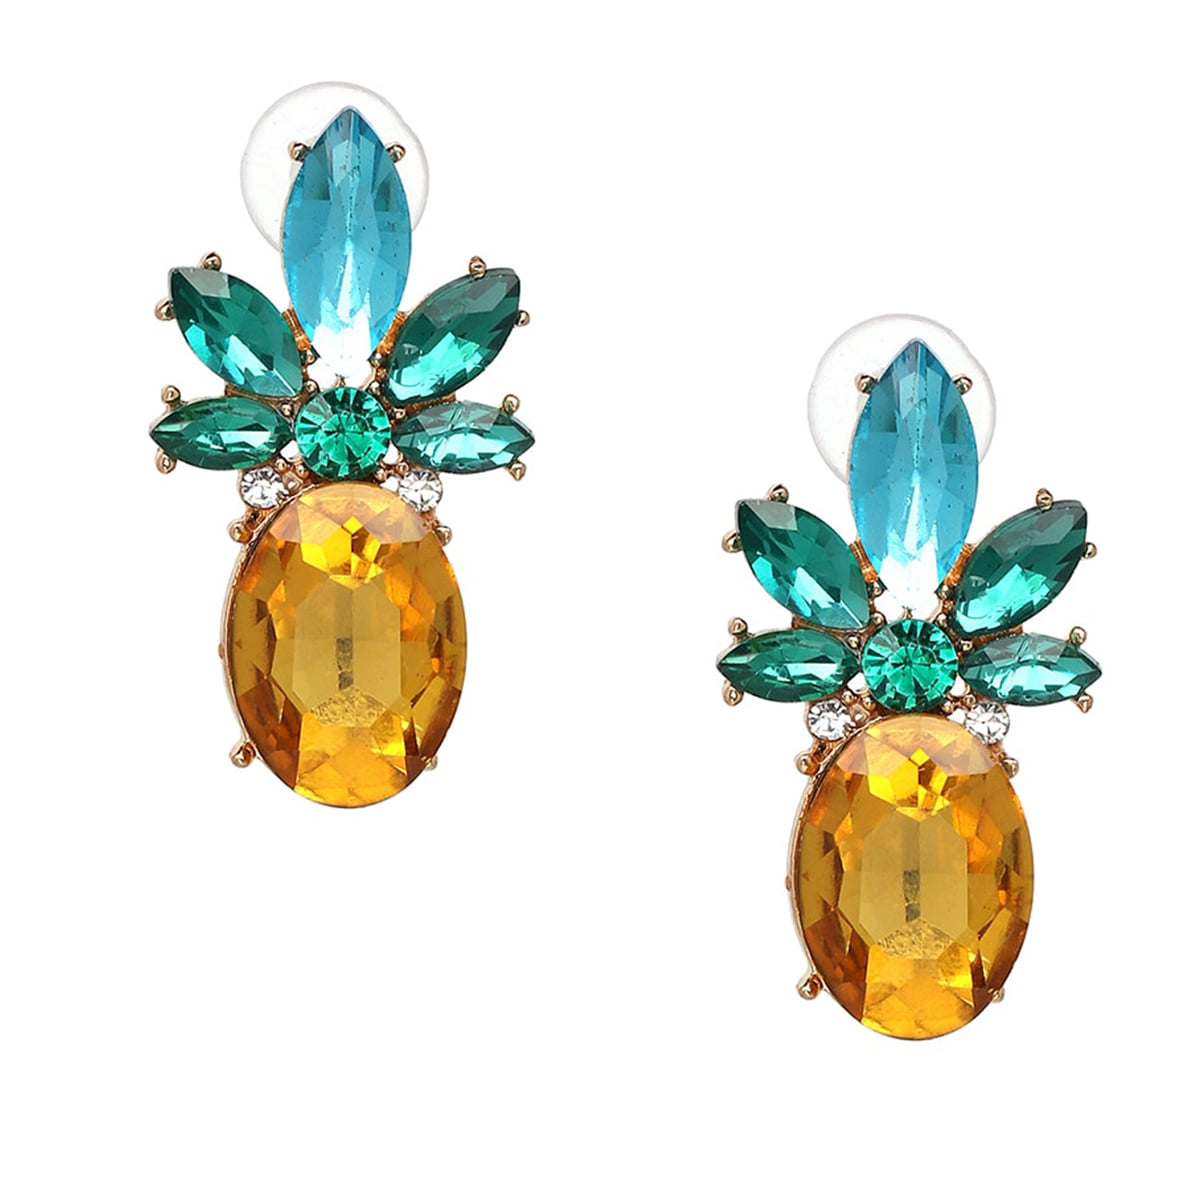 Jewelry Collection Pineapple Crystal Drop Stud Earrings, Multi